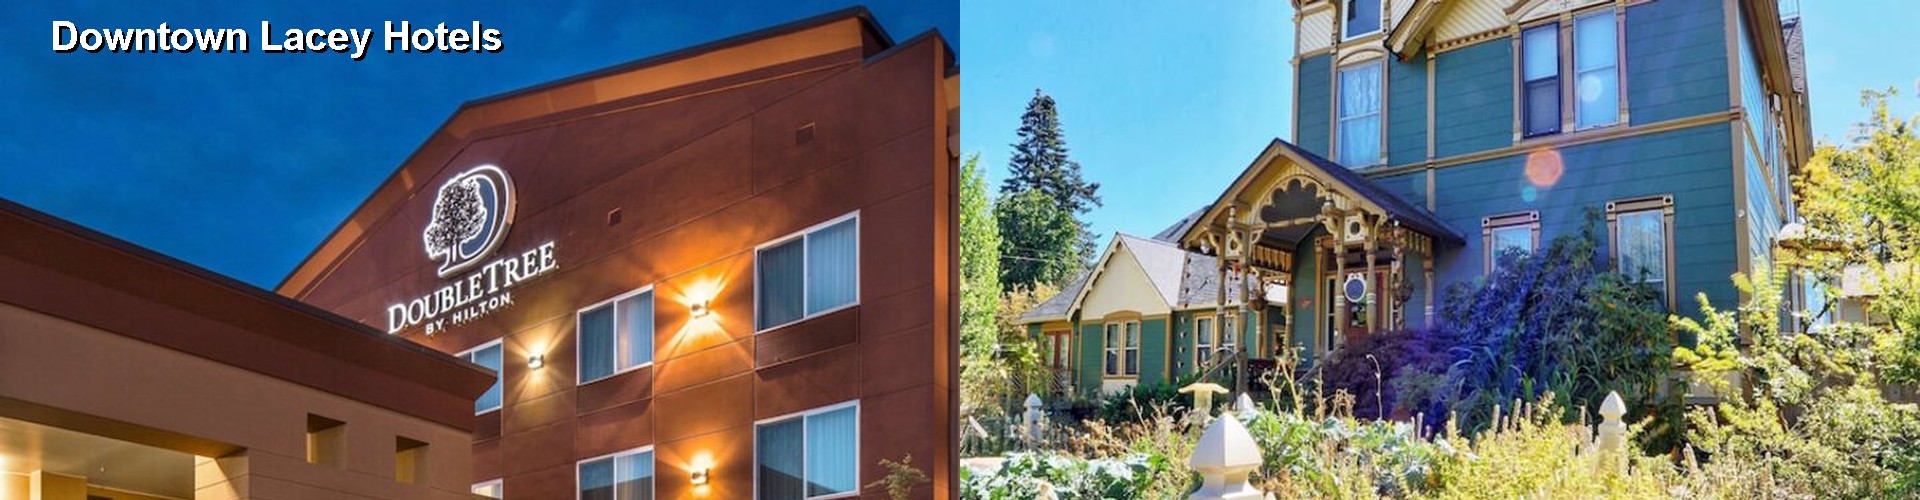 5 Best Hotels near Downtown Lacey